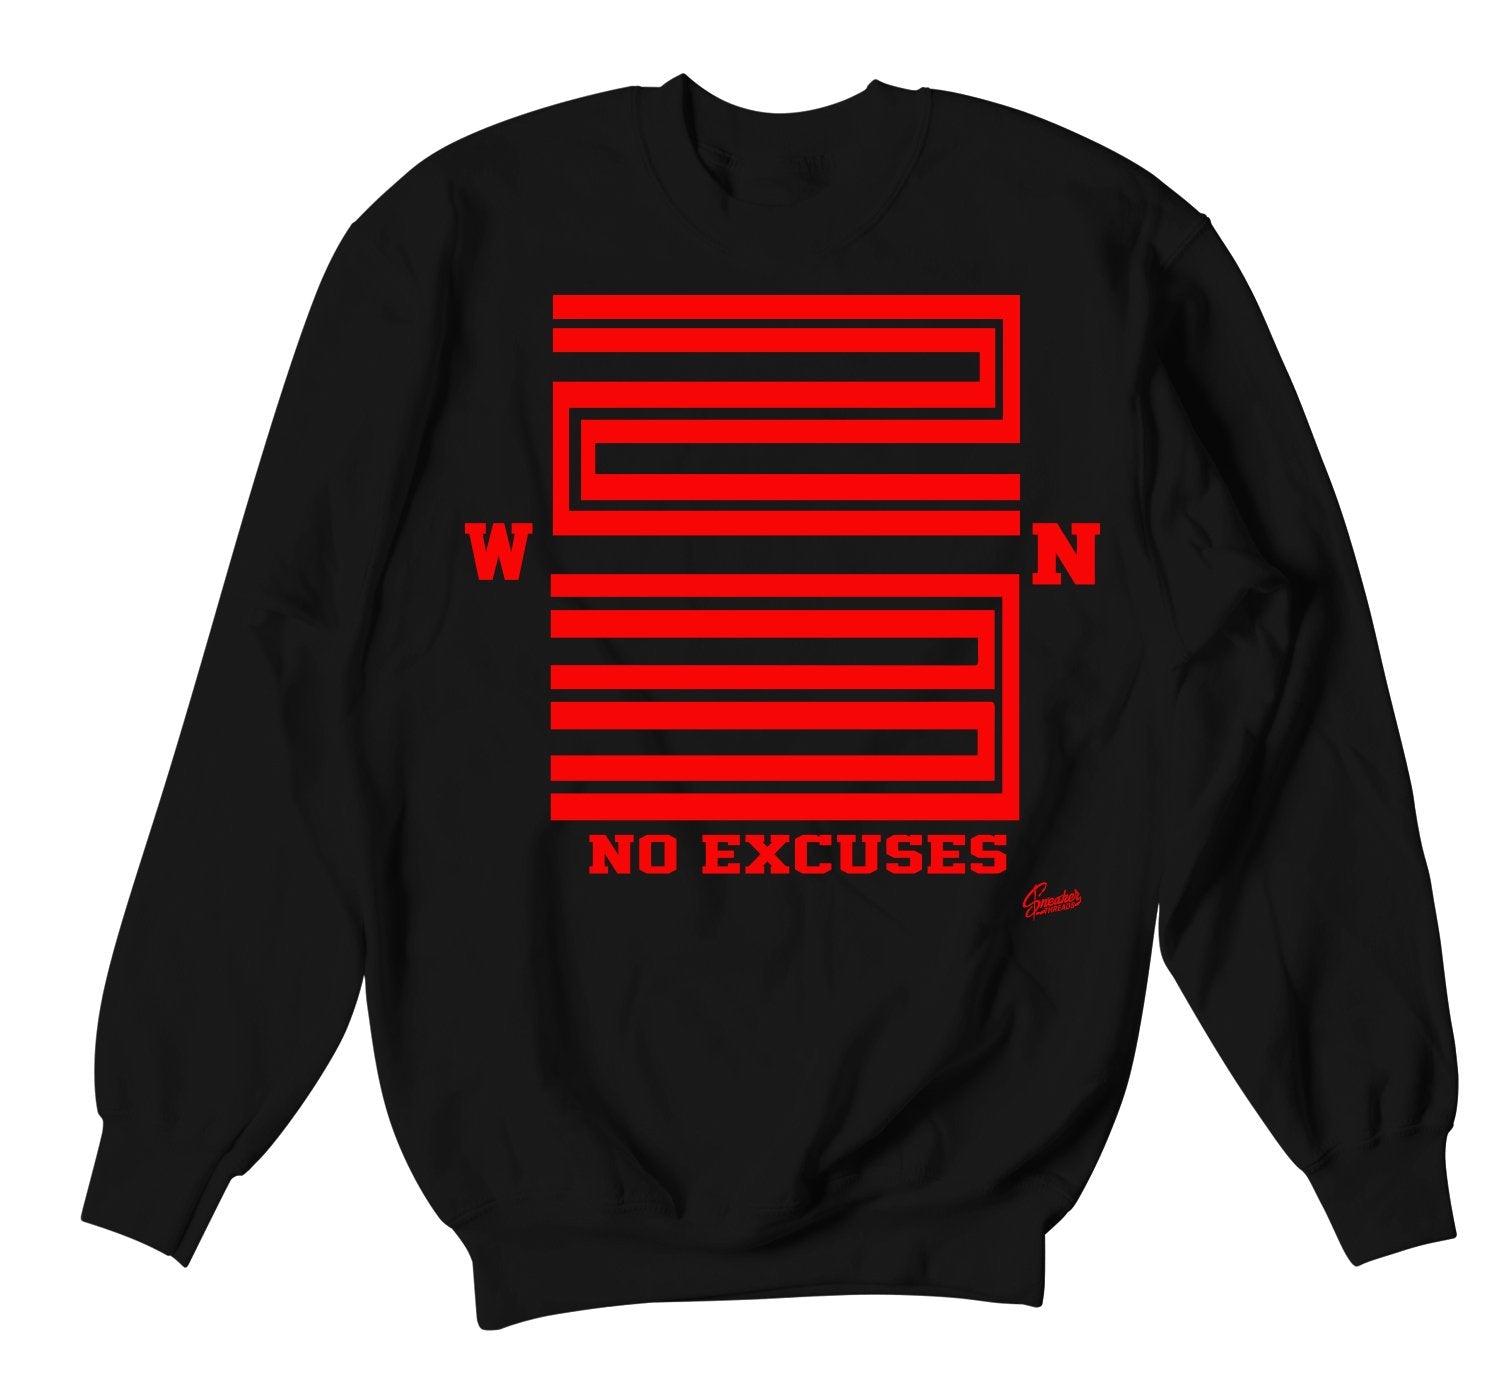 Freshest Sweater to match Jordan 11 Bred Release